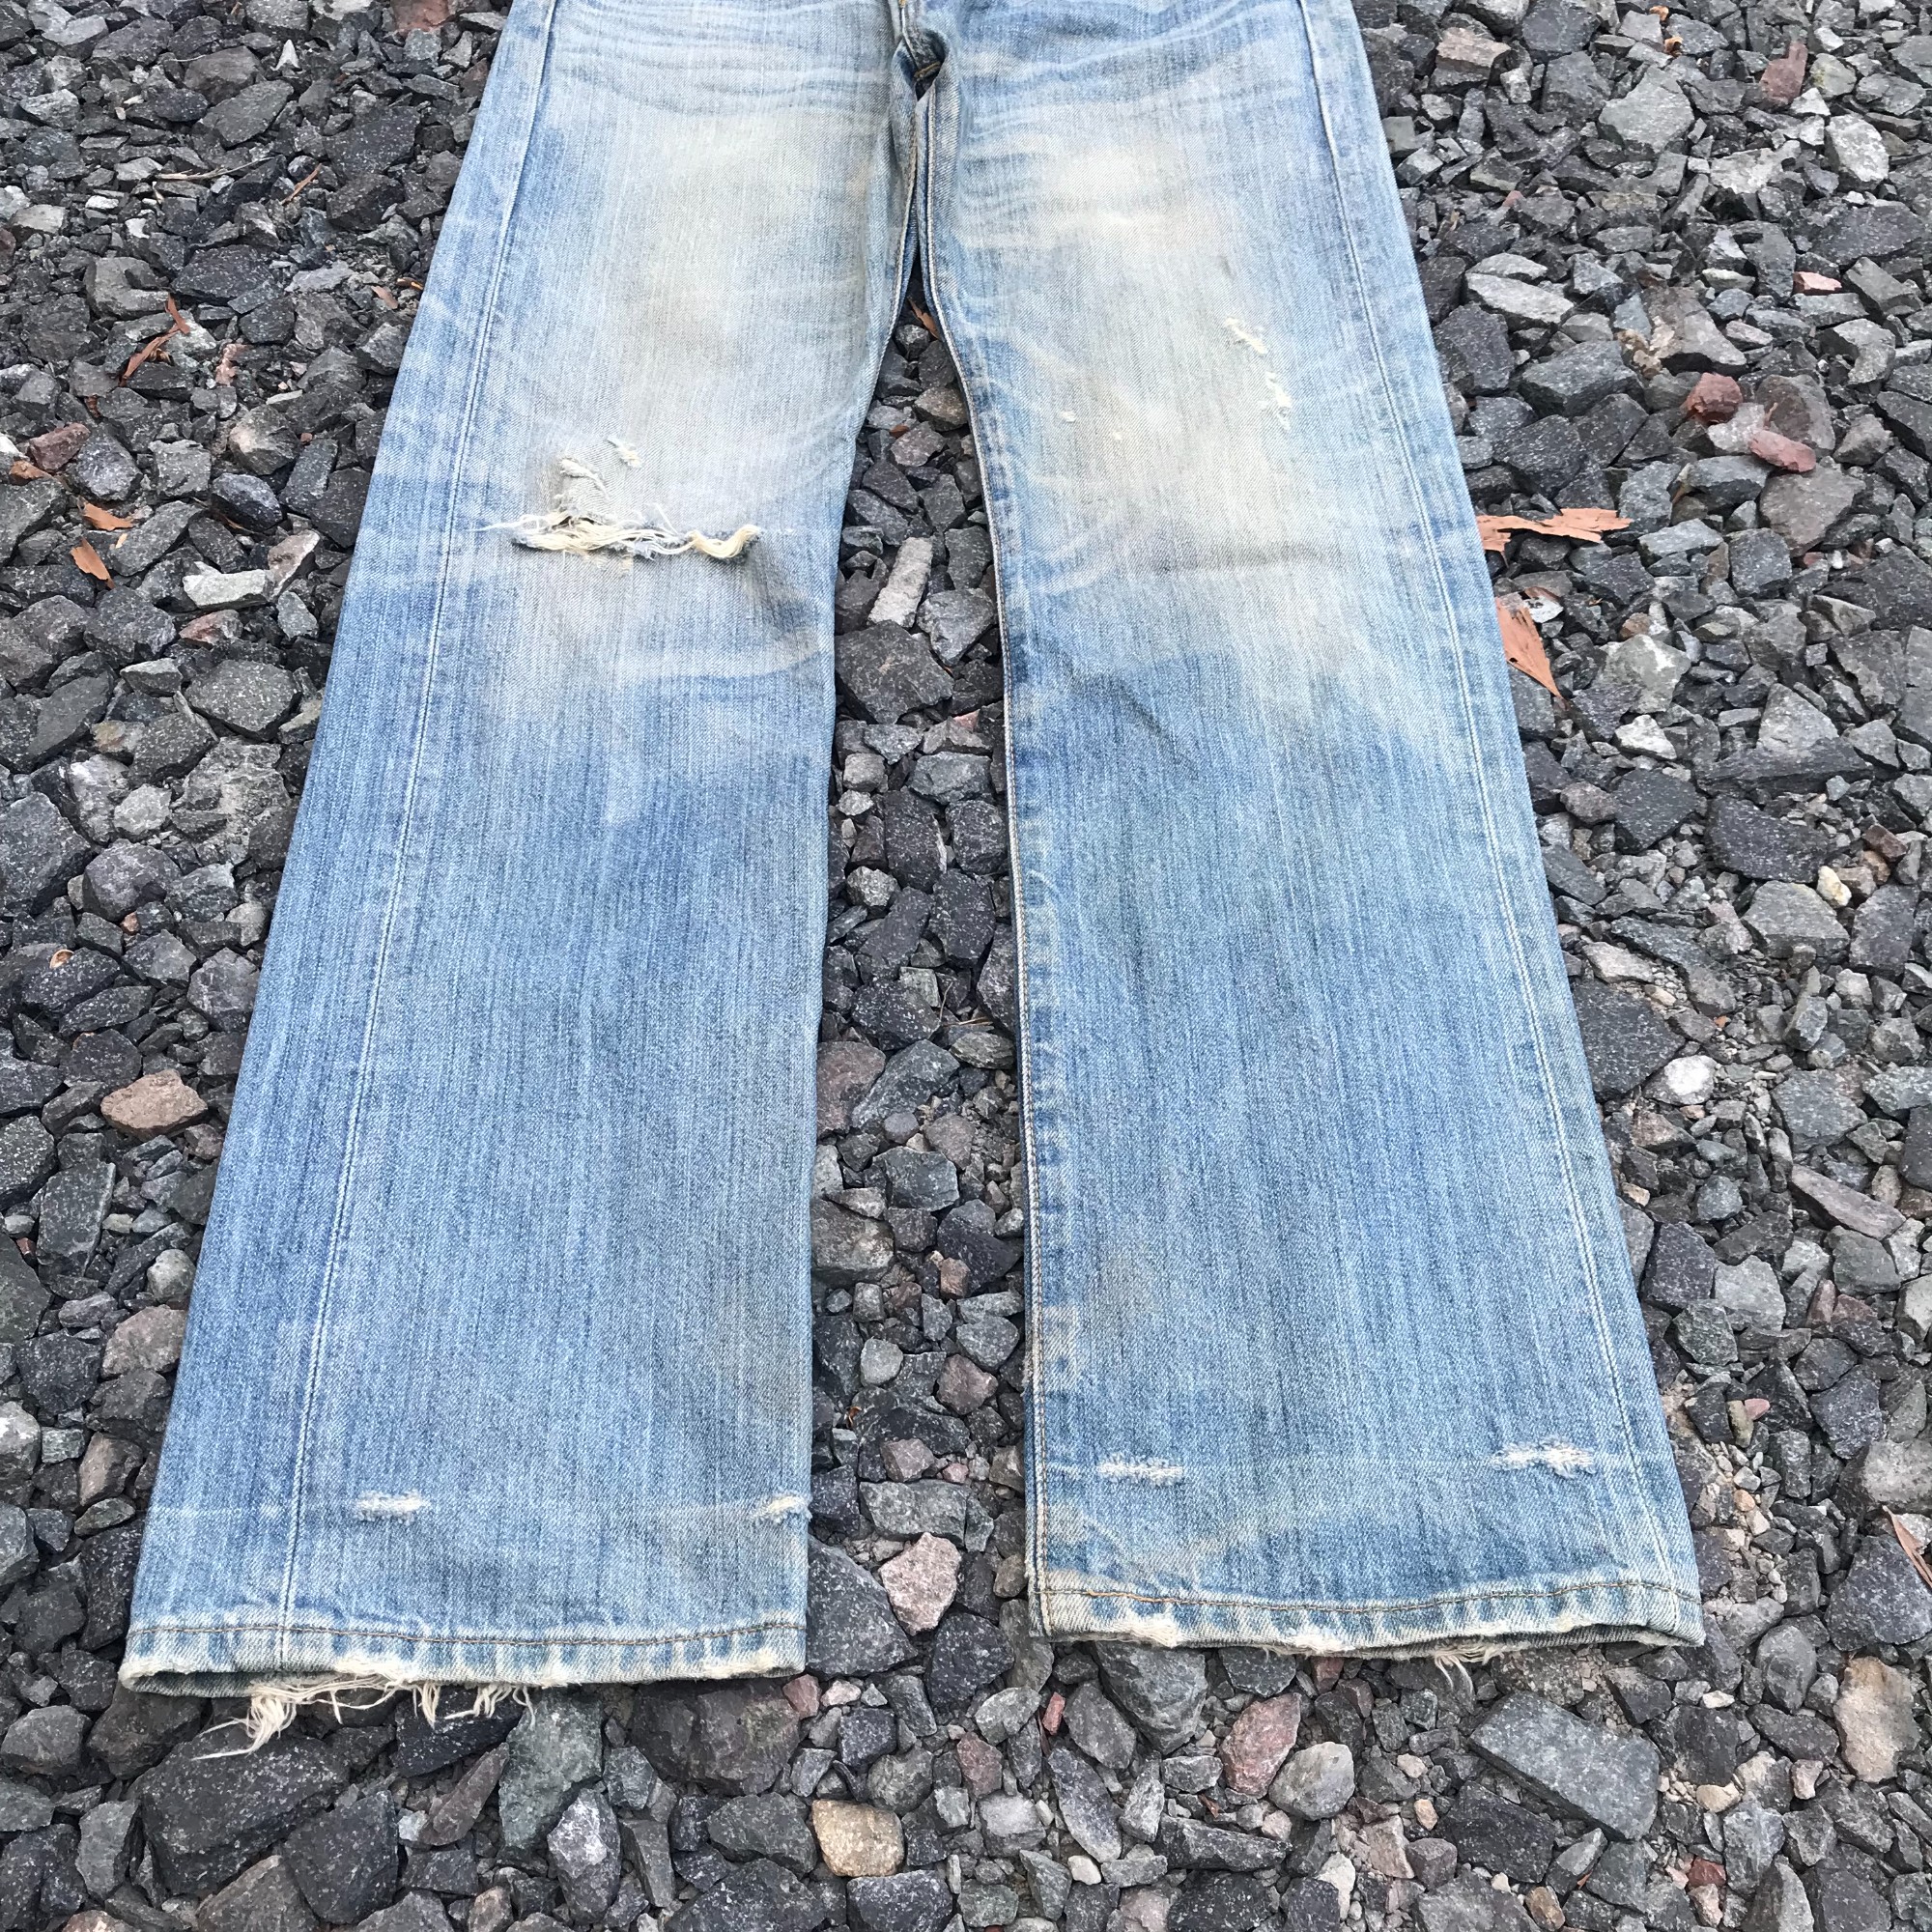 Vintage Levis 501 faded Distressed denim Waist 30x32 inch trashed ripped kurt cobain style - 2